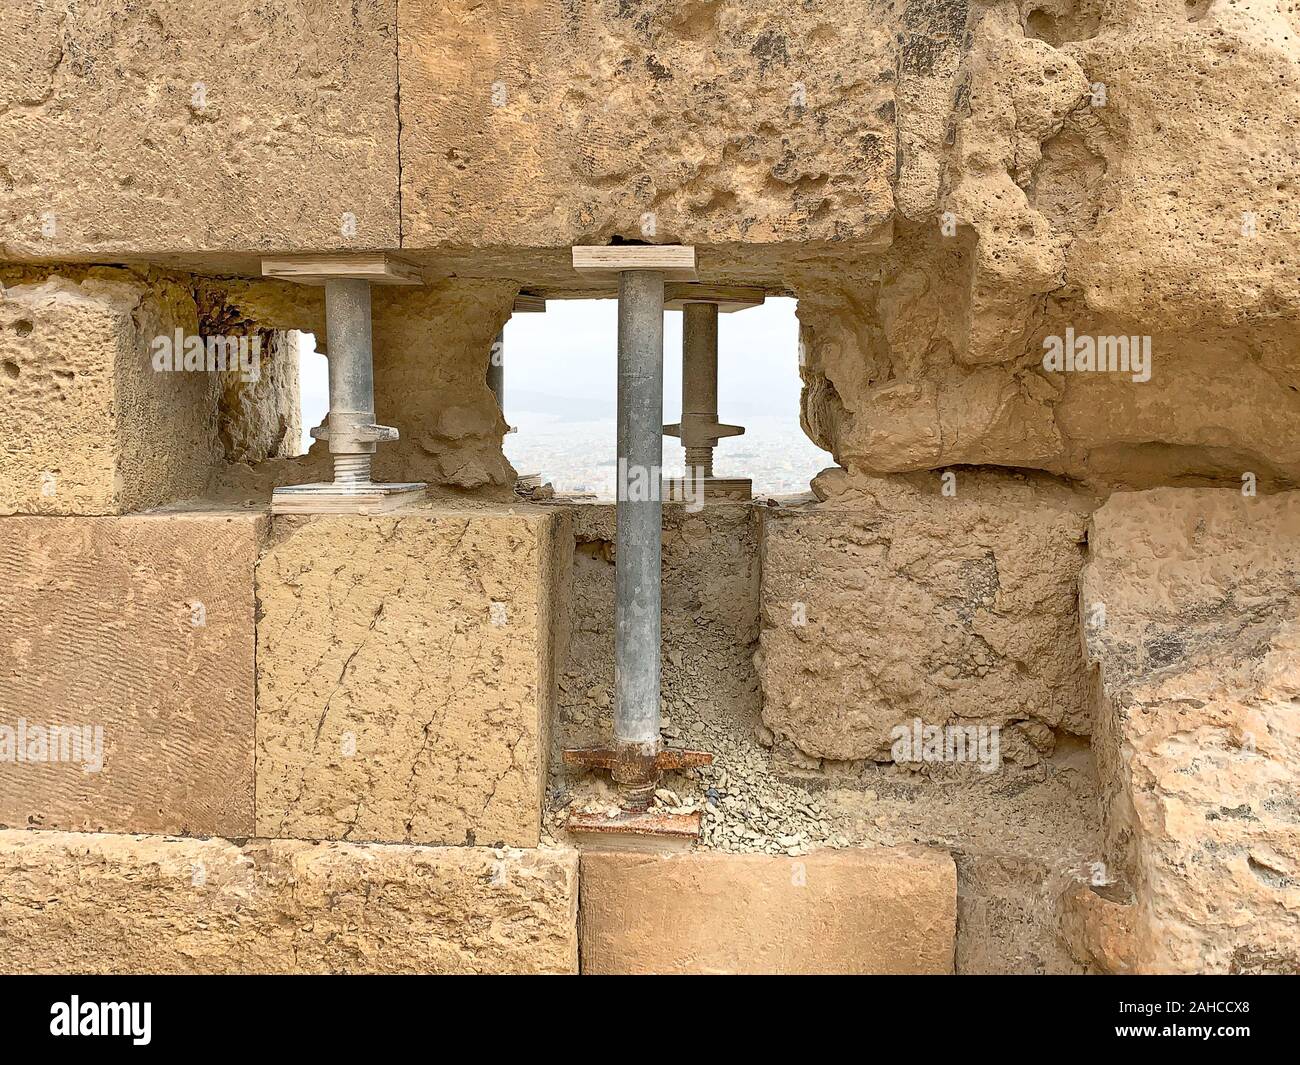 Temporary steel pillars support an ancient stone wall at the Acropolis in Athens, Attica region, Greece, Europe. Provisionally repaired hole in wall. Stock Photo